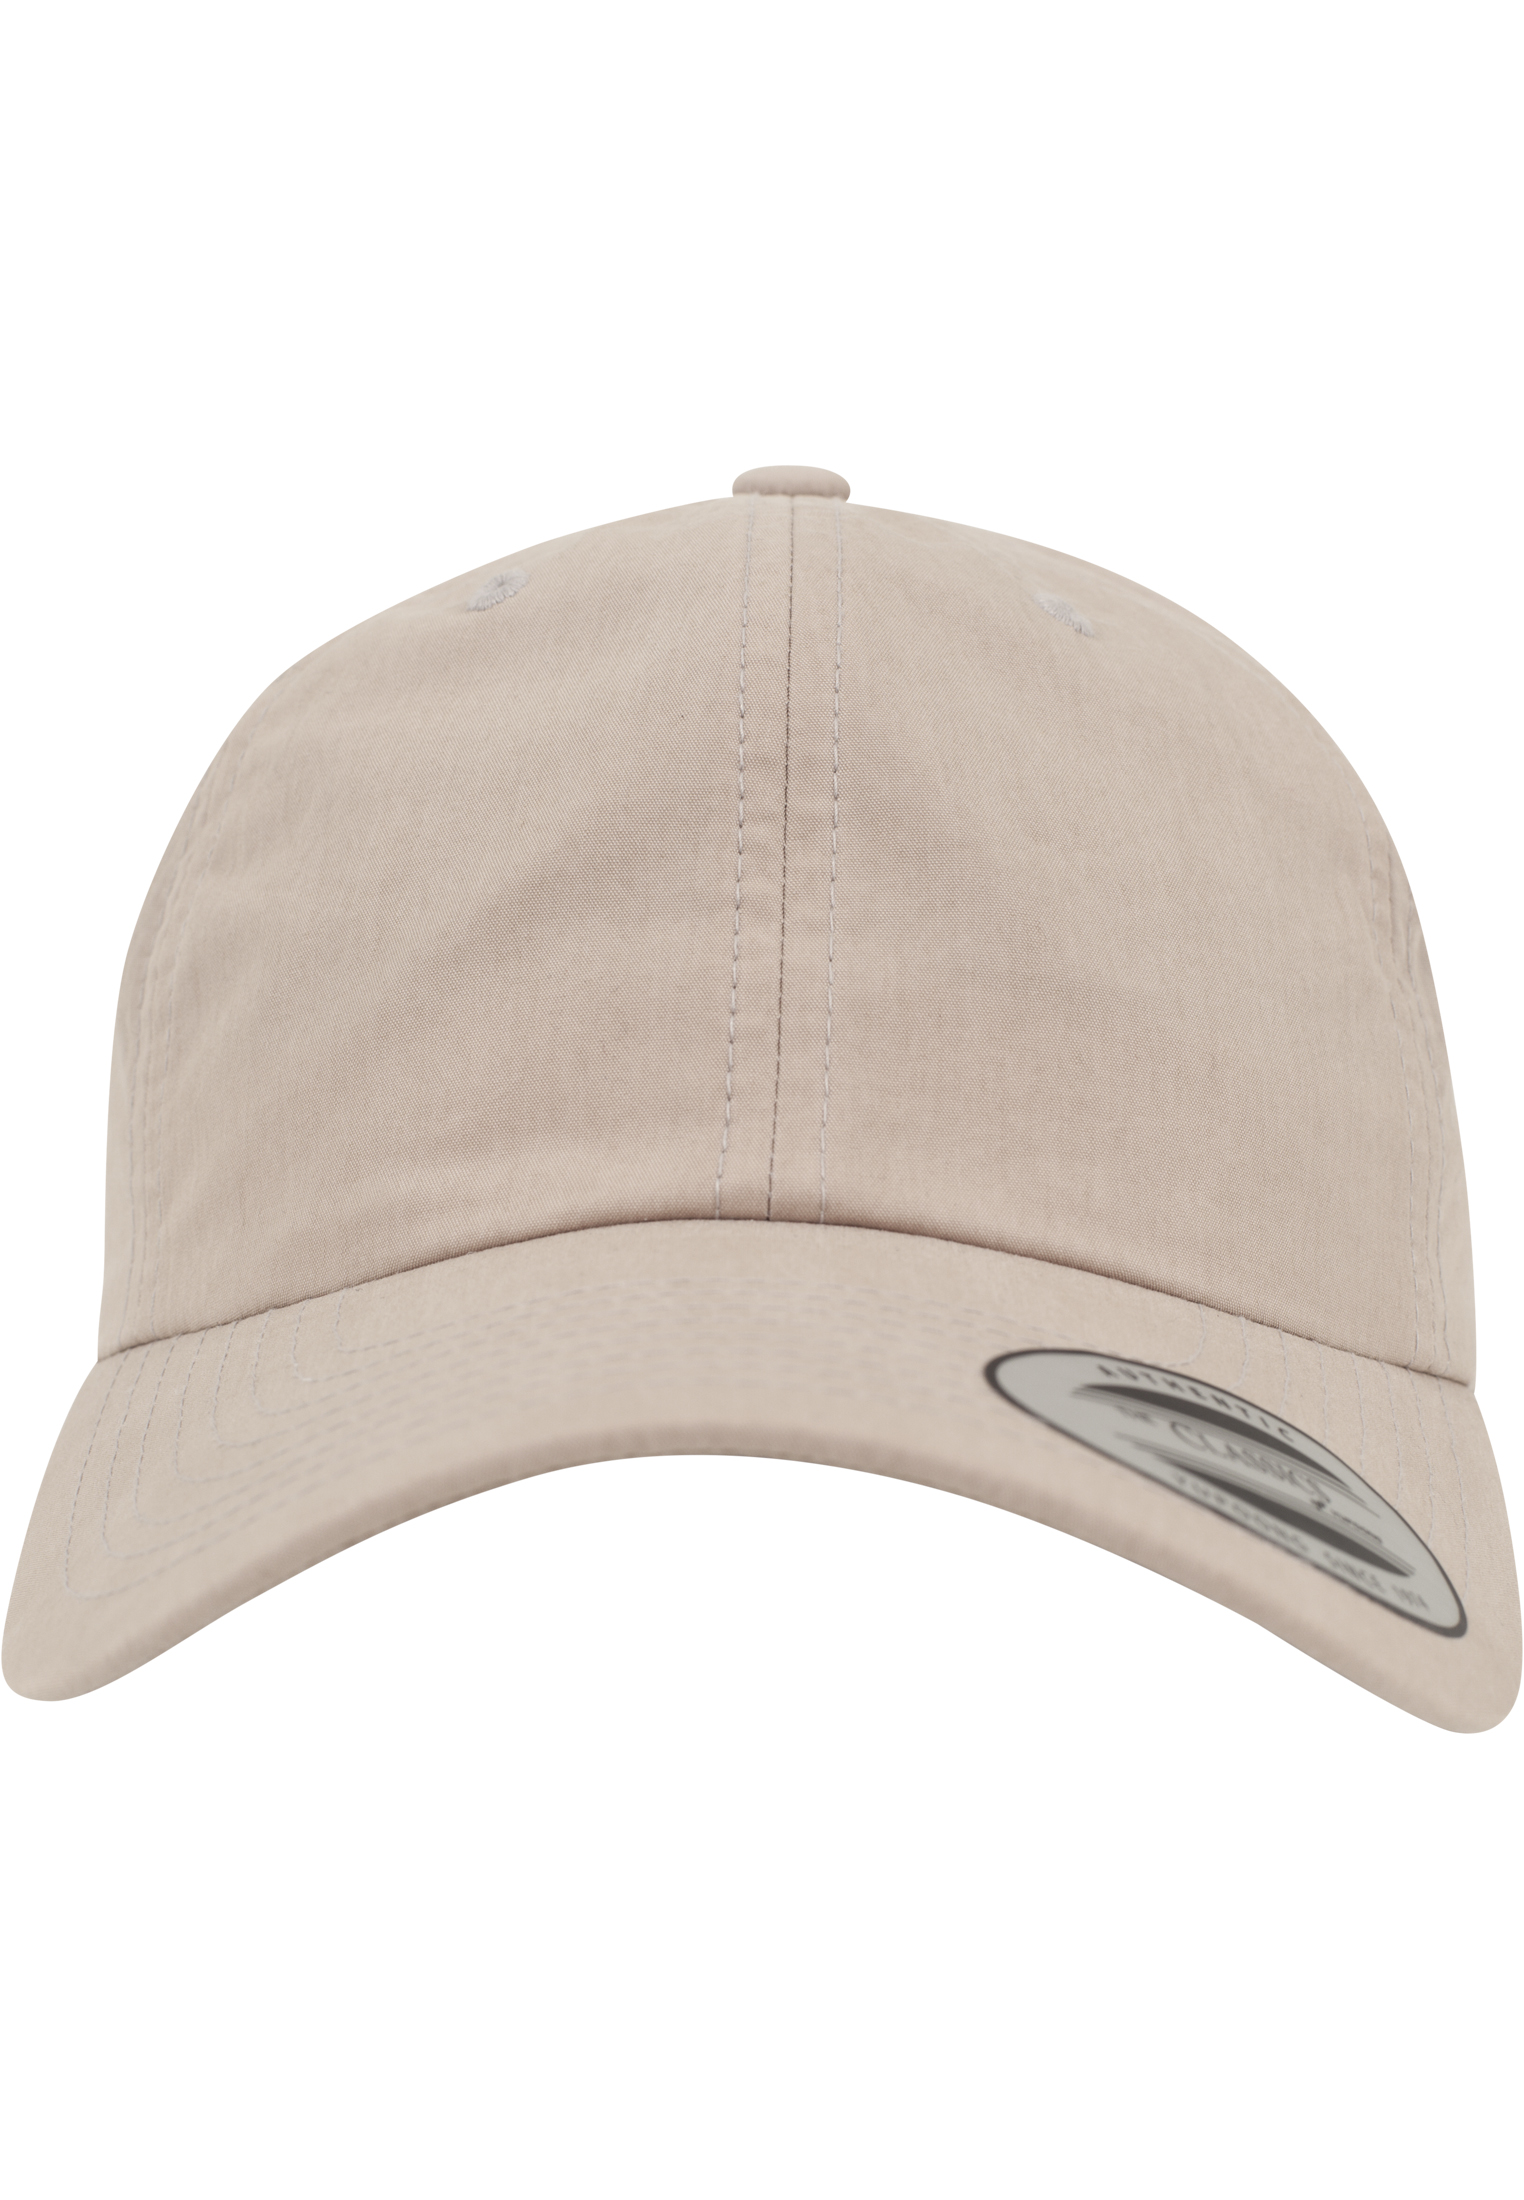 Cap-6245W Profile Low Washed